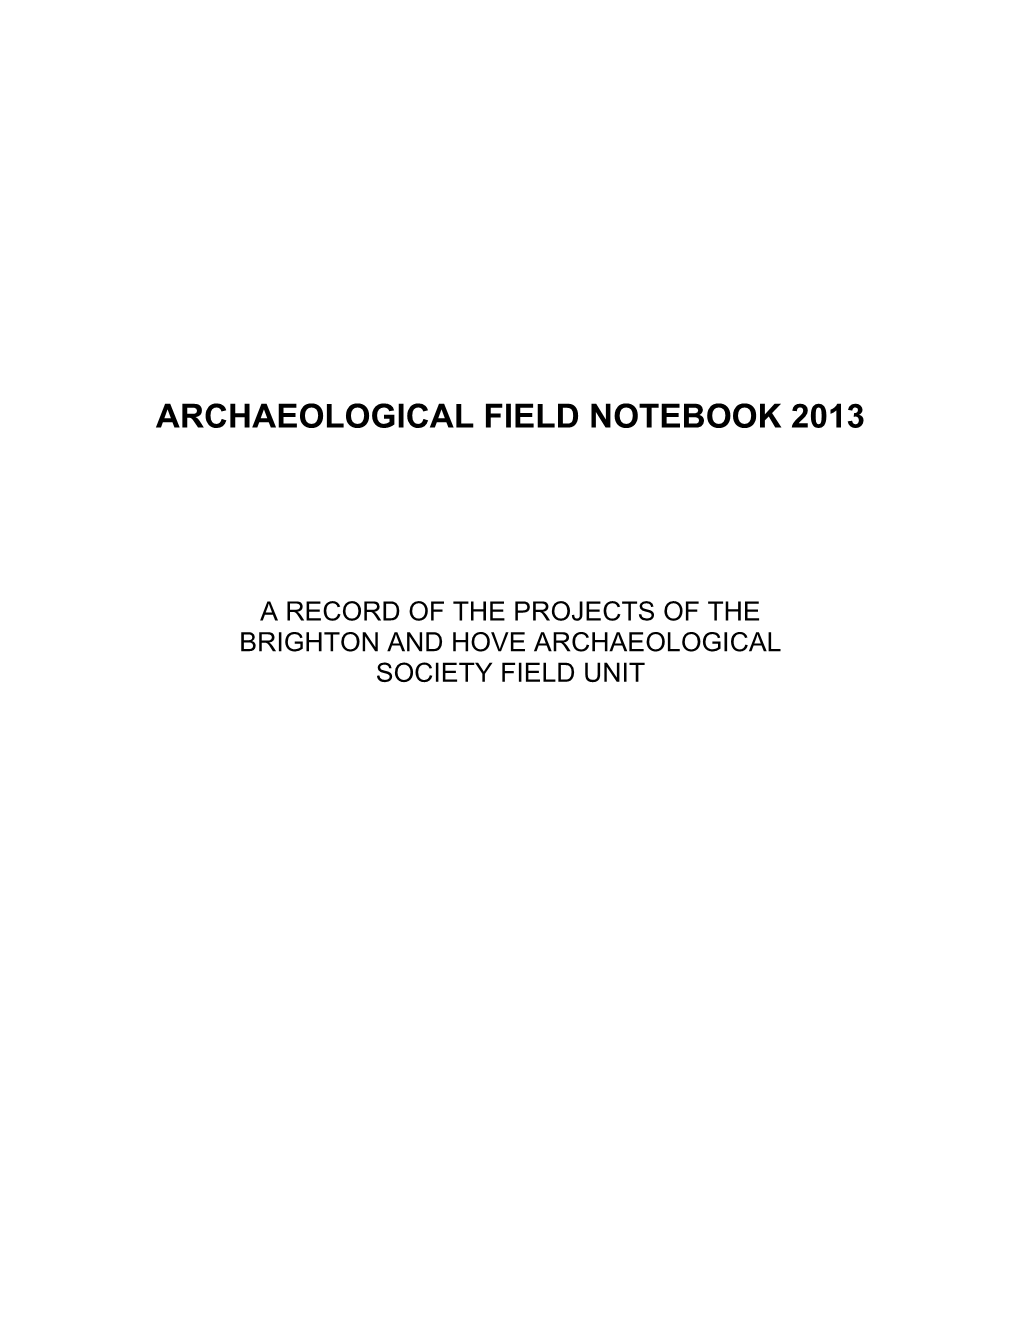 Archaeological Field Notebook 2013